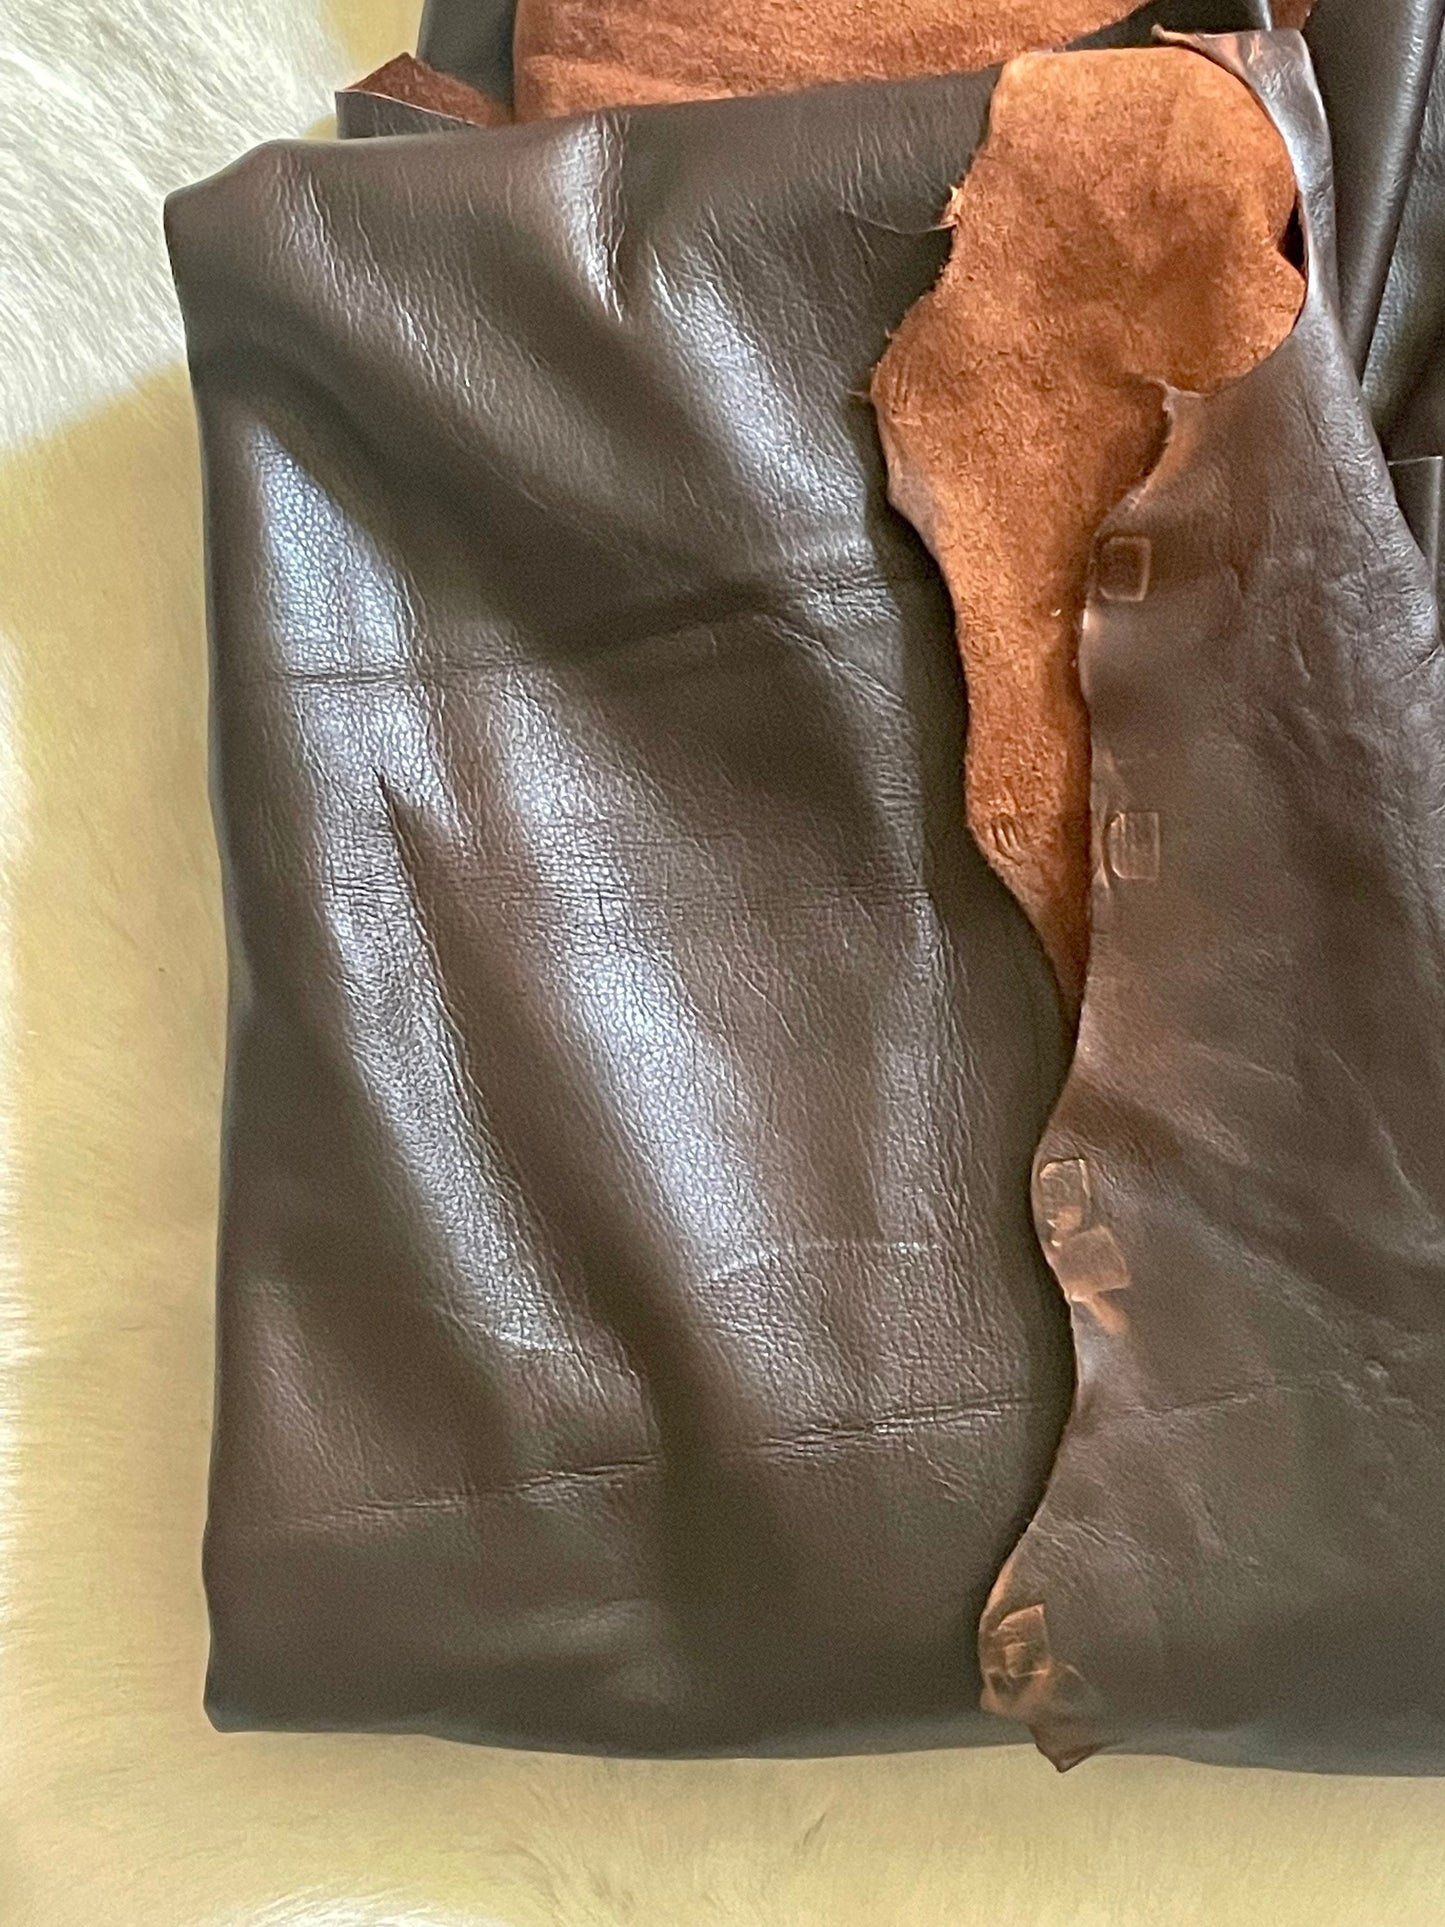 Brown Upholstery leather - Raw Leather - Wholesale Leather 2-4oz